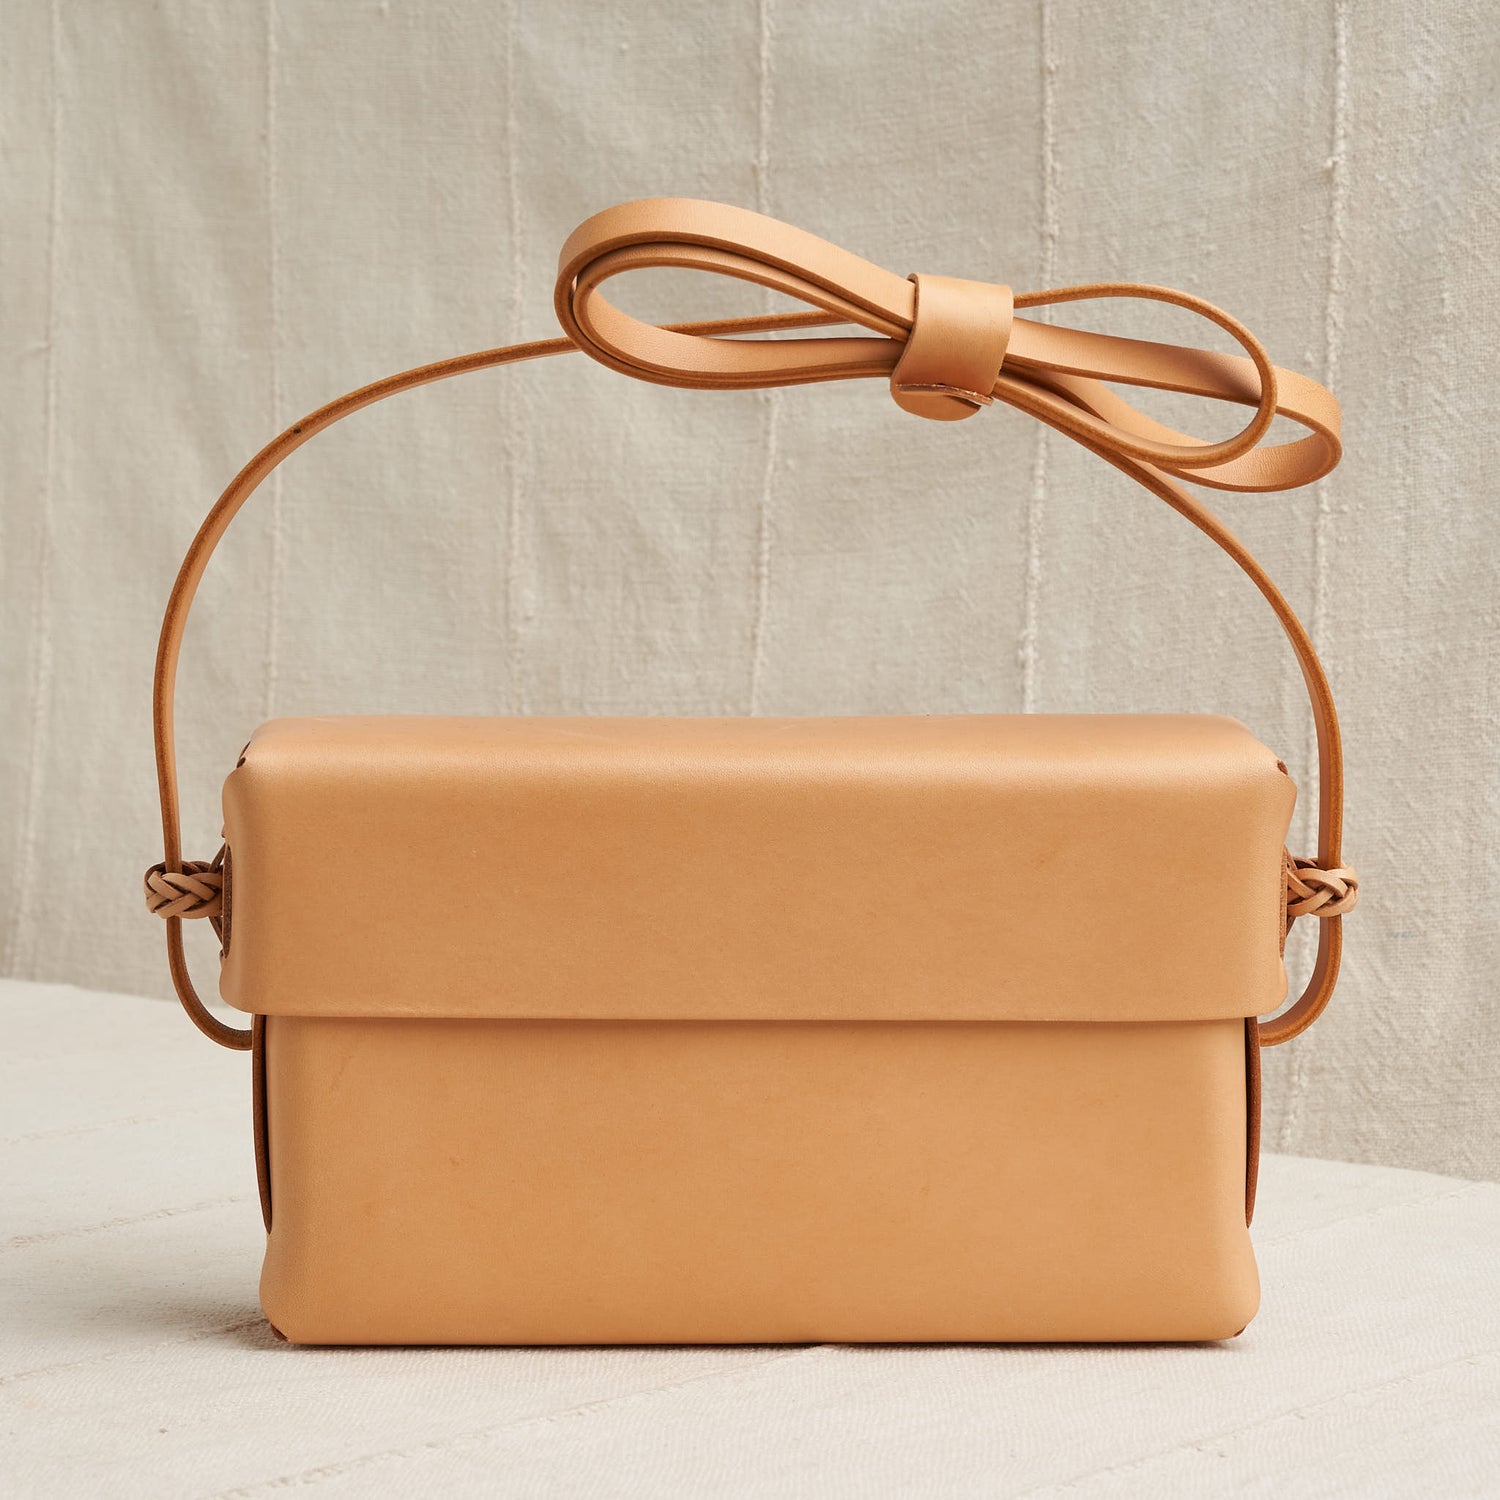 Woven Lid Bag, Natural Vegetable Tanned Leather